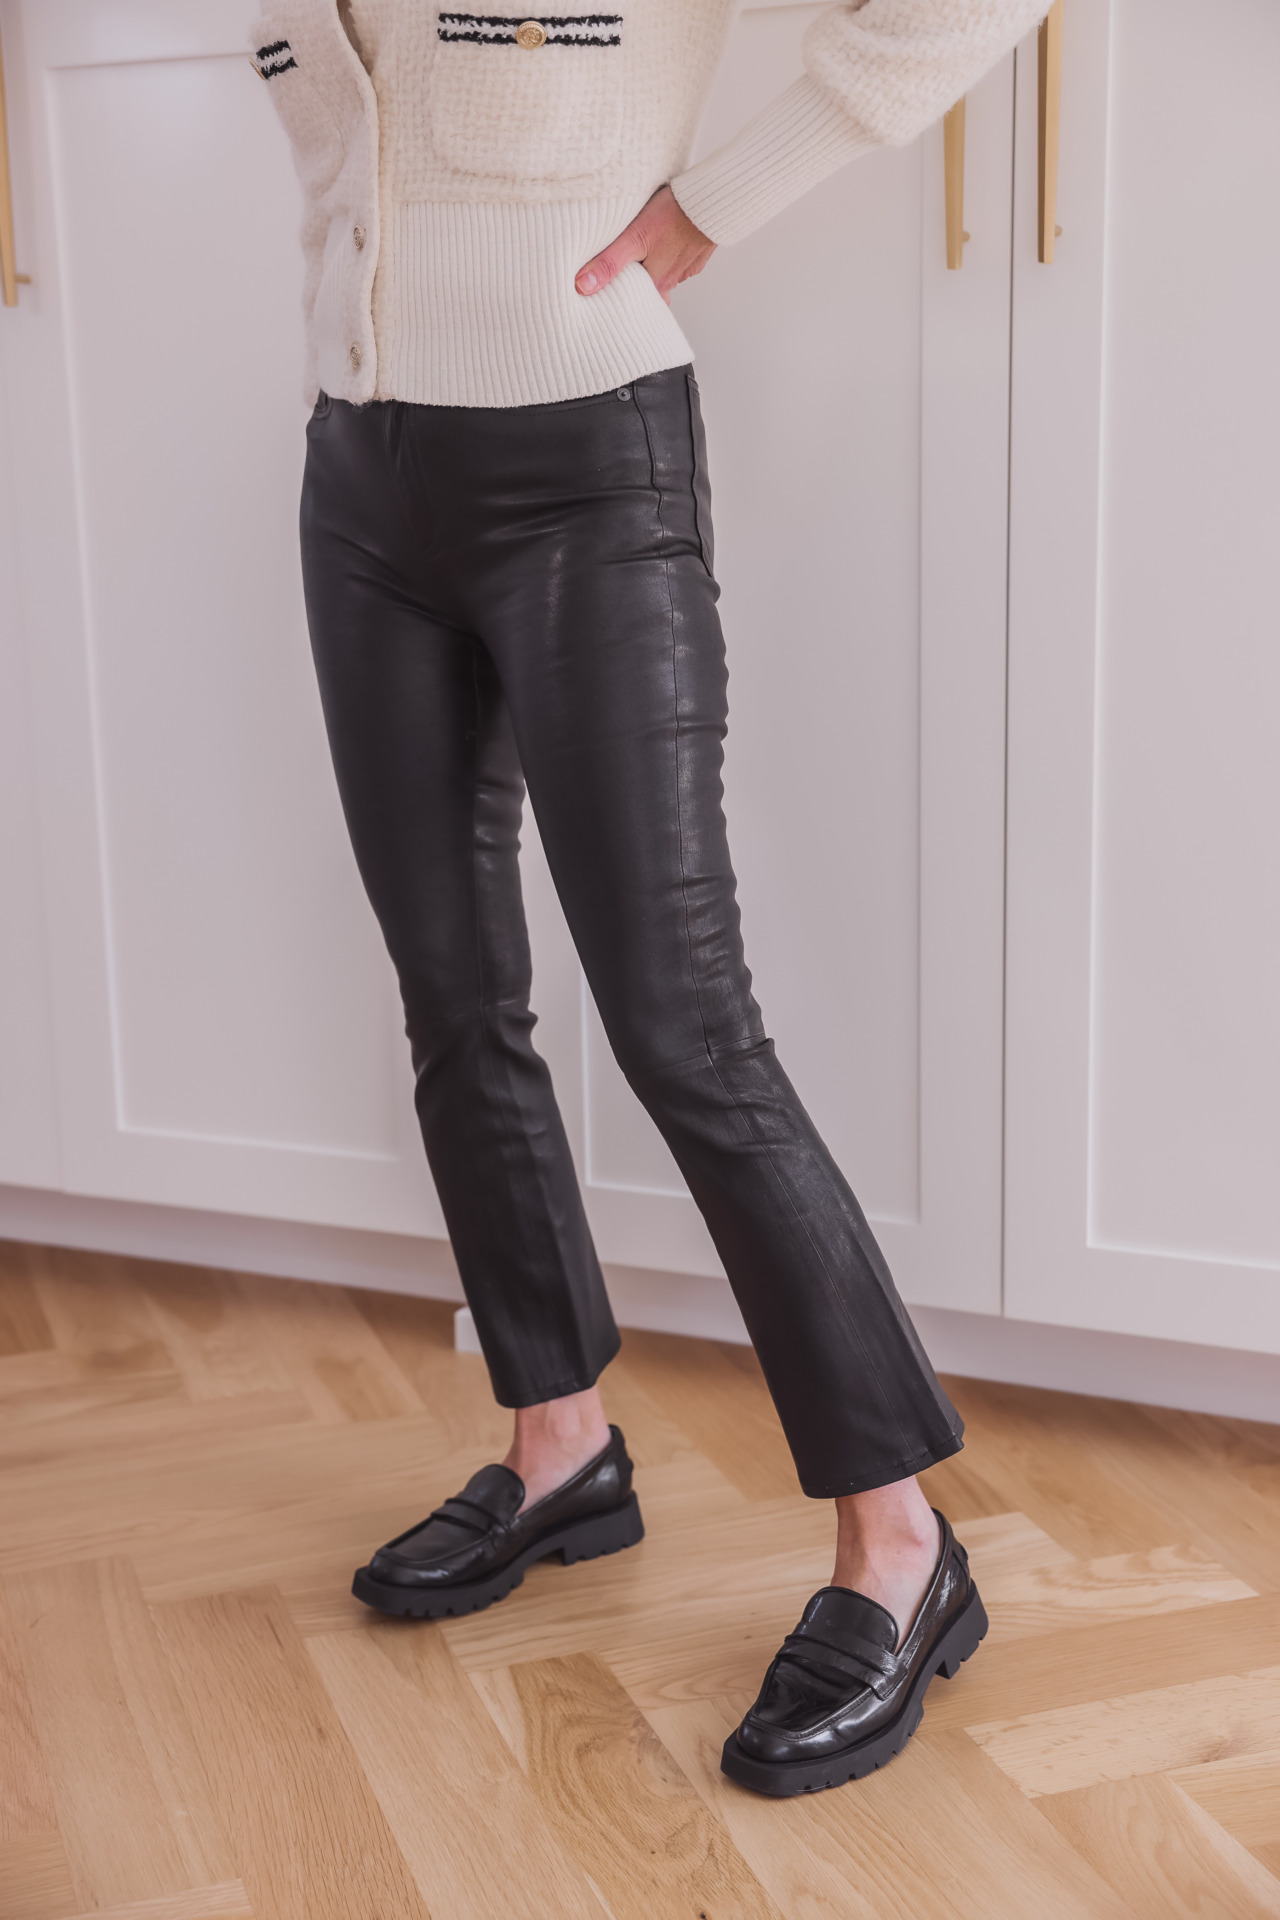 How To Wear Loafers with Leather Pants